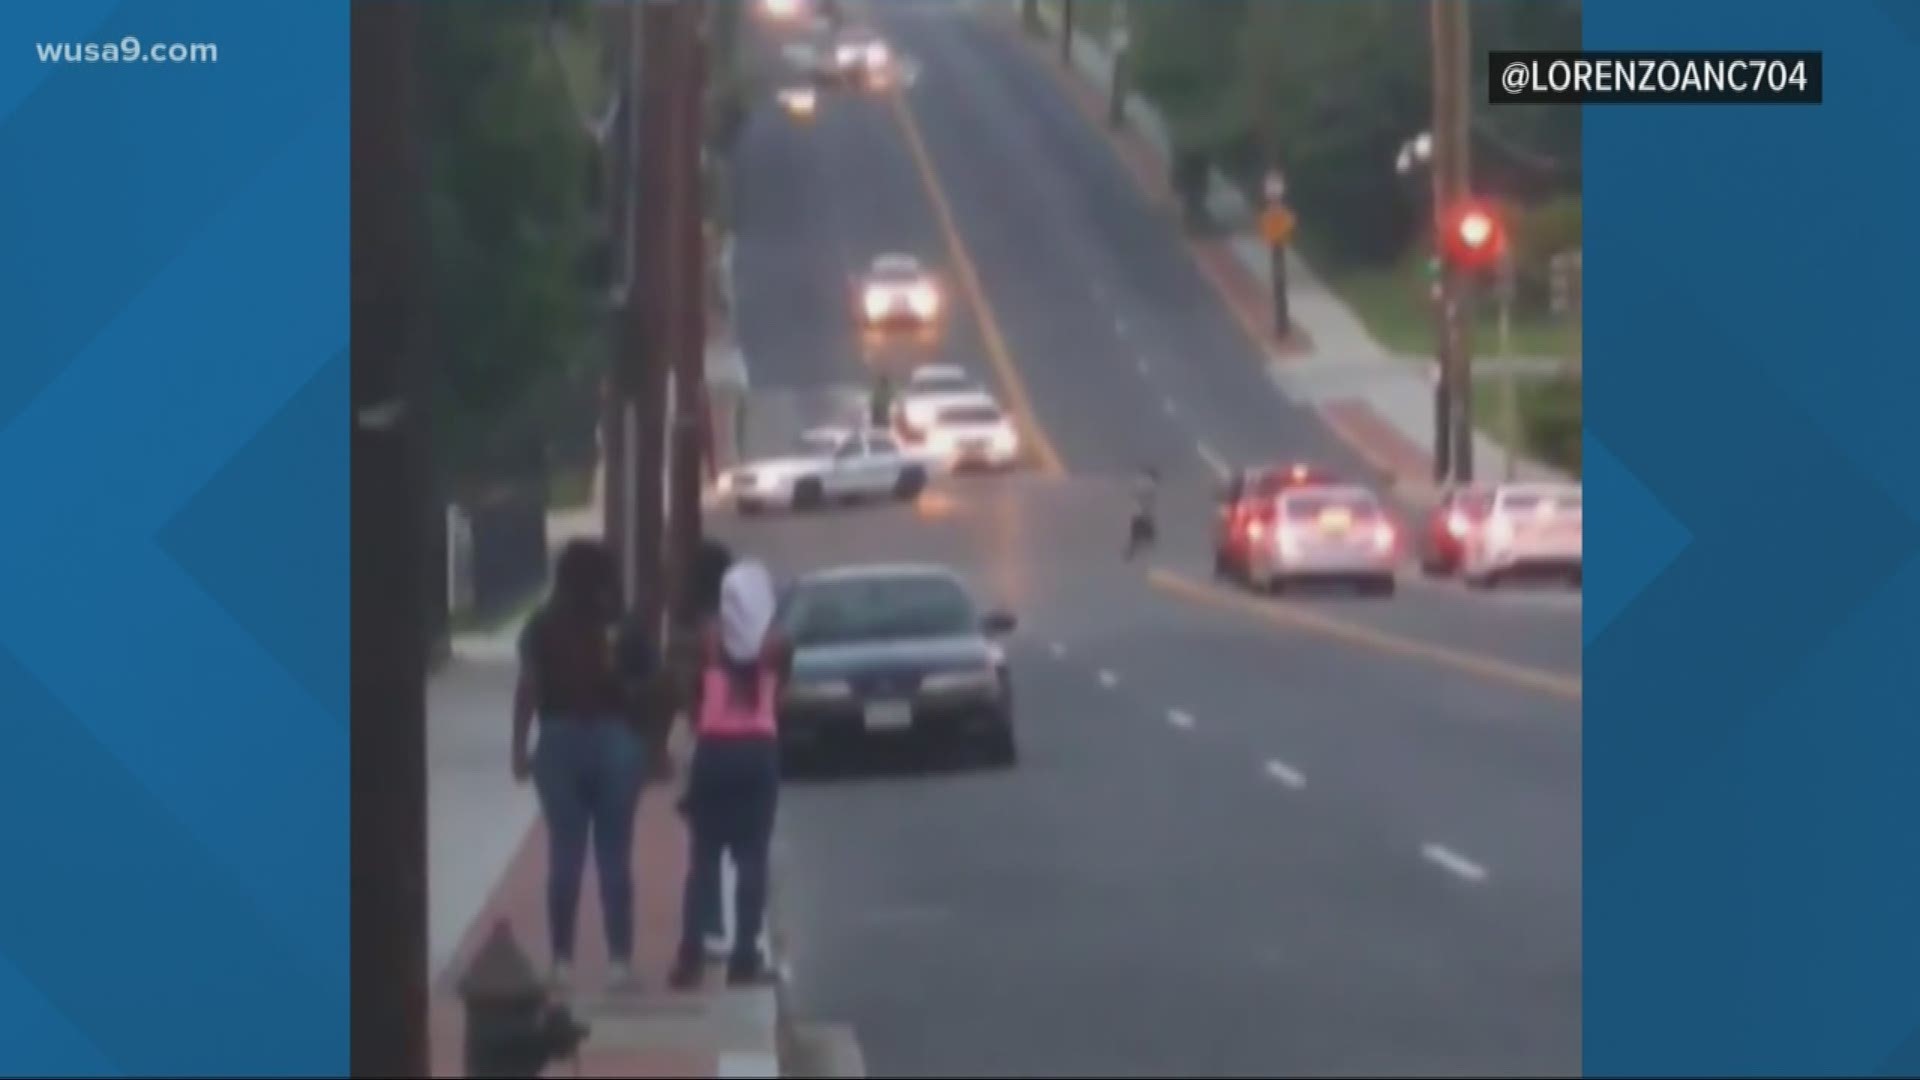 Prince George’s County police are launching an investigation into a video on social media showing an officer chasing a dirt bike rider over the weekend. The video shows a crowd of dirt bikes and ATVs riding near Southern Avenue on Saturday. Some of the drivers were reportedly riding on the wrong side of the road and ignoring stop lights.